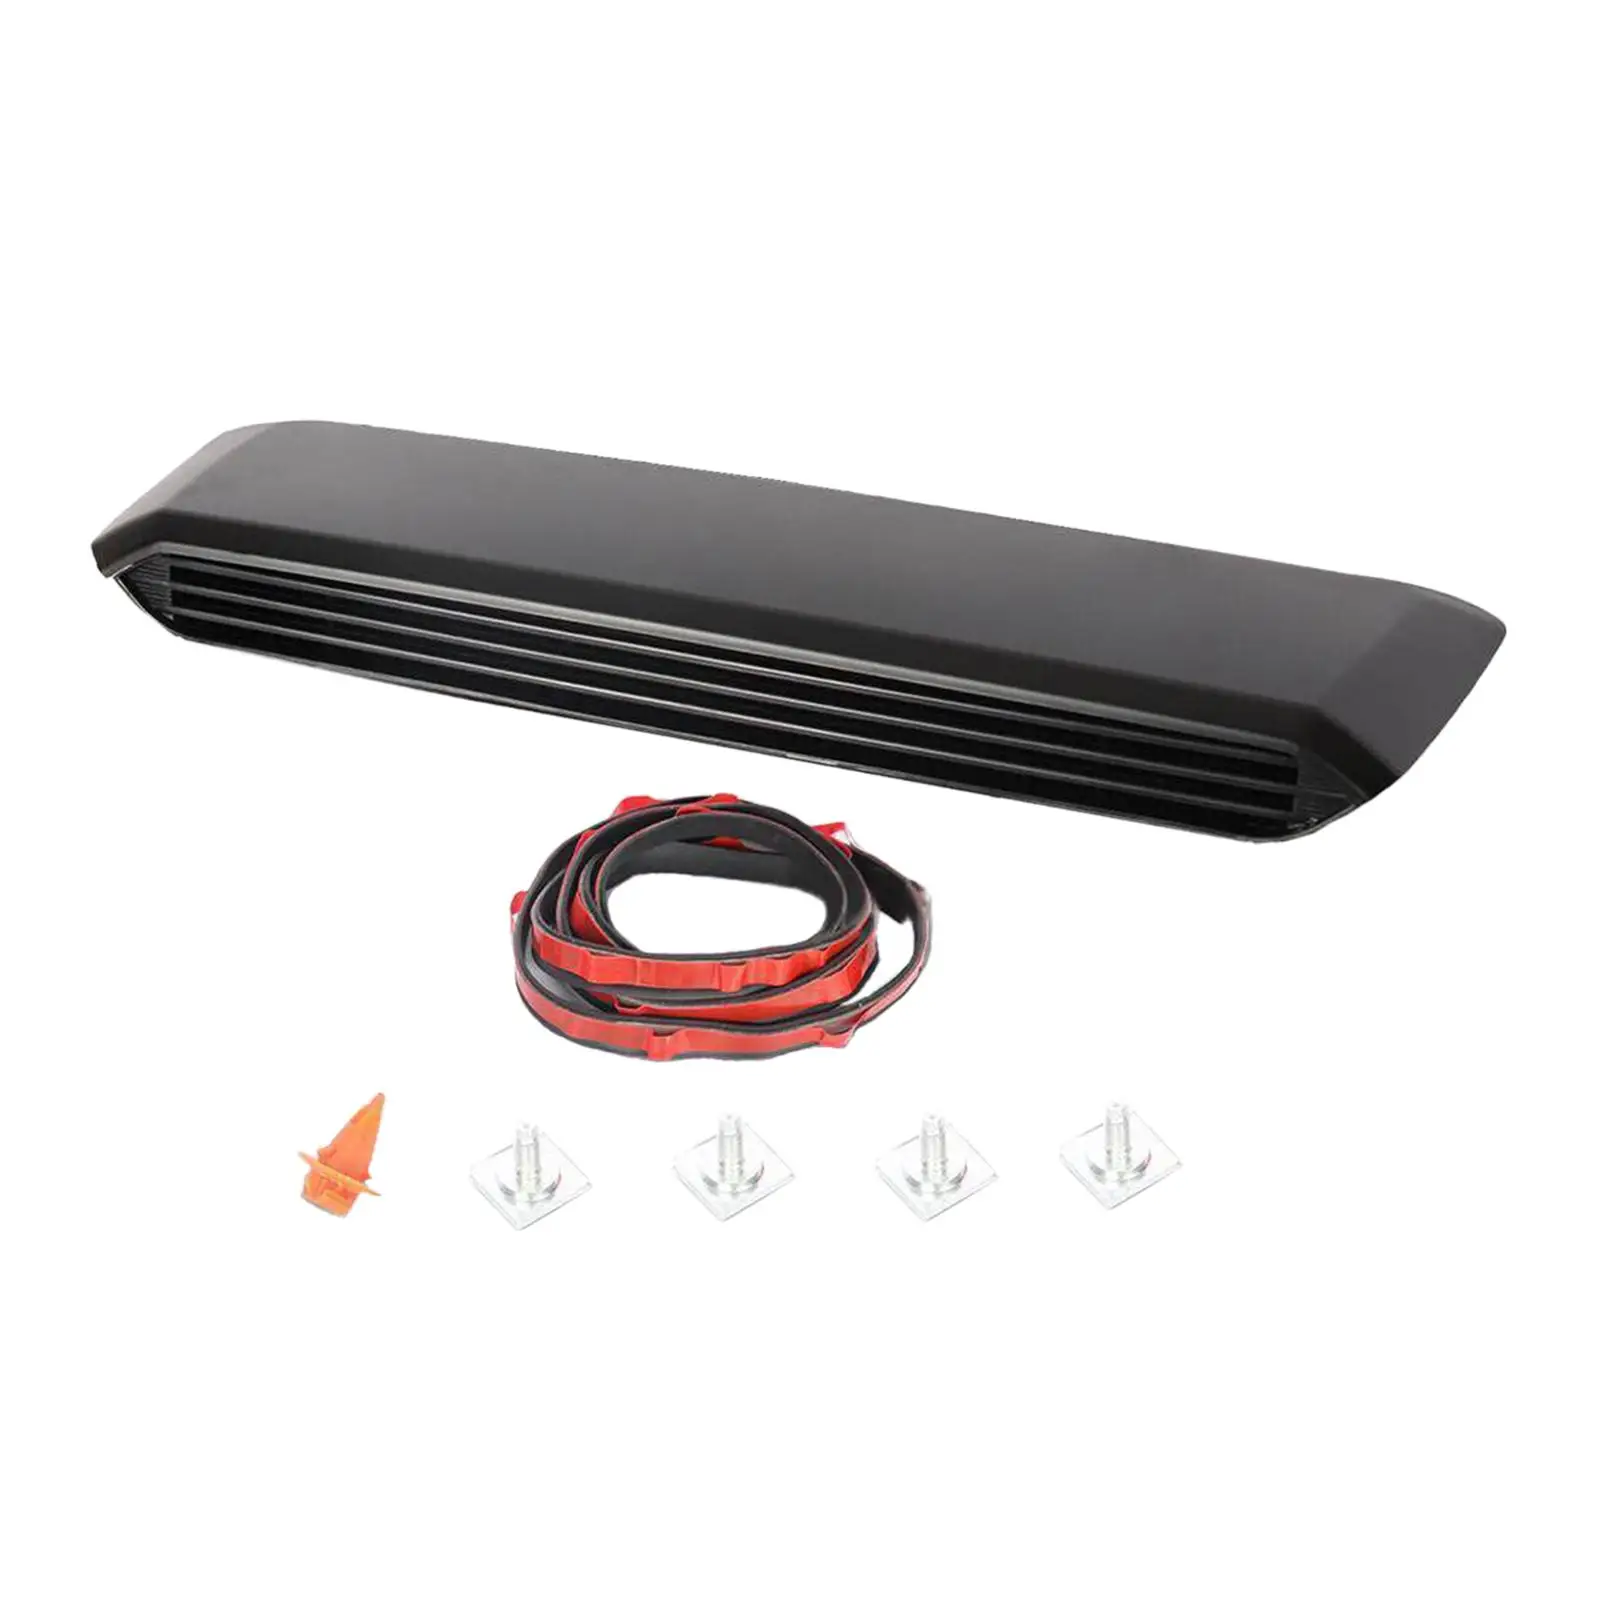 76181-04900, Hood Scoop Kit, Easy to Install, Spare Parts, Premium Car Accessories Replaces